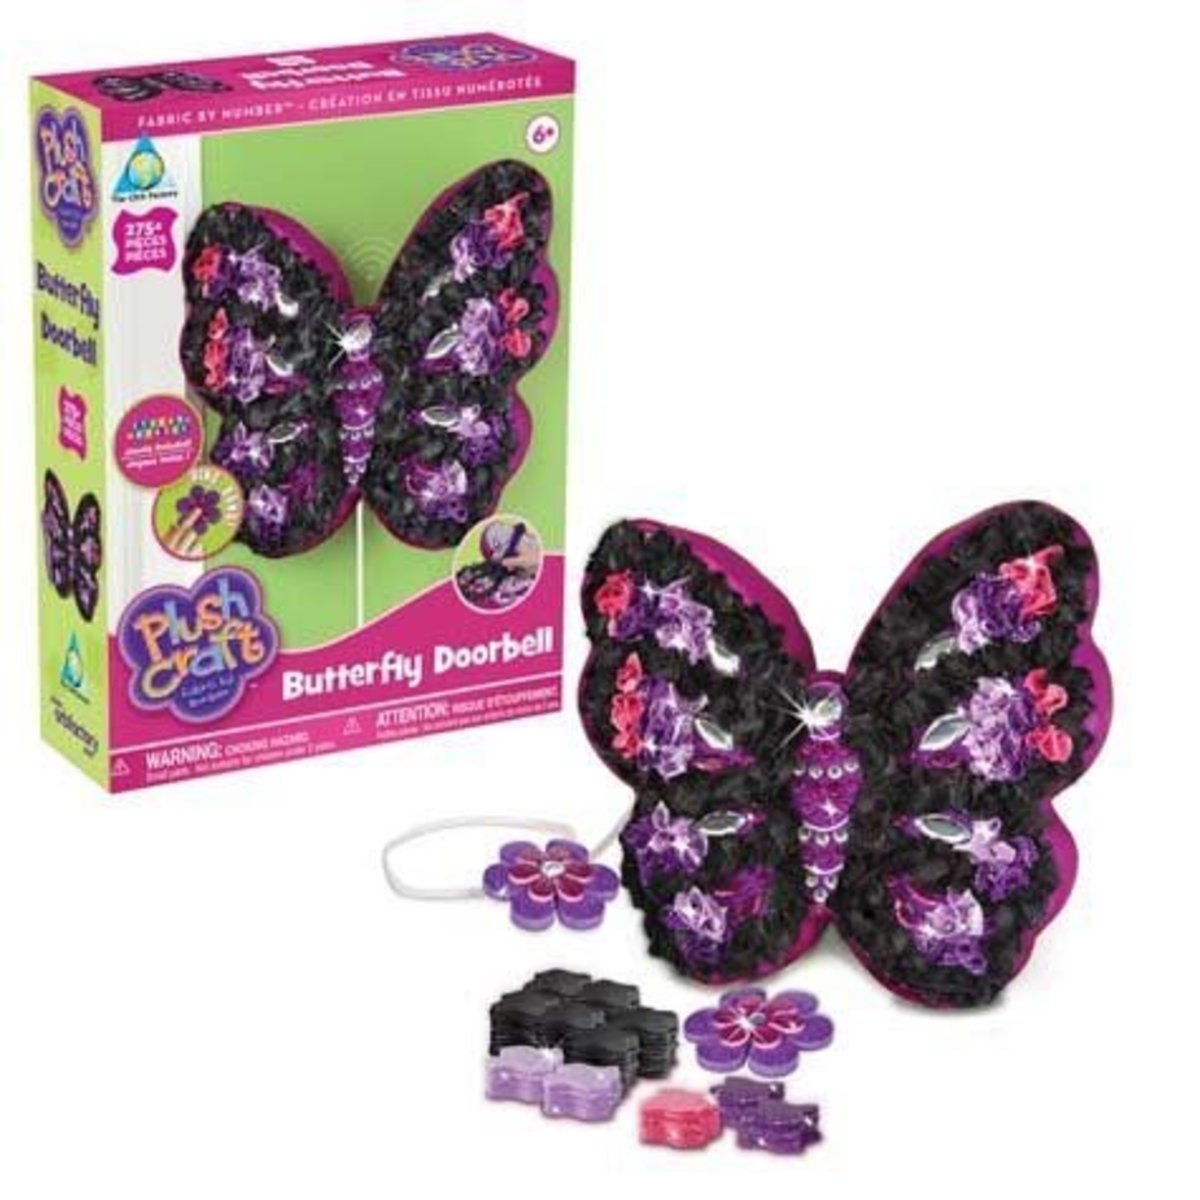 The Orb factory Butterfly Doorbell